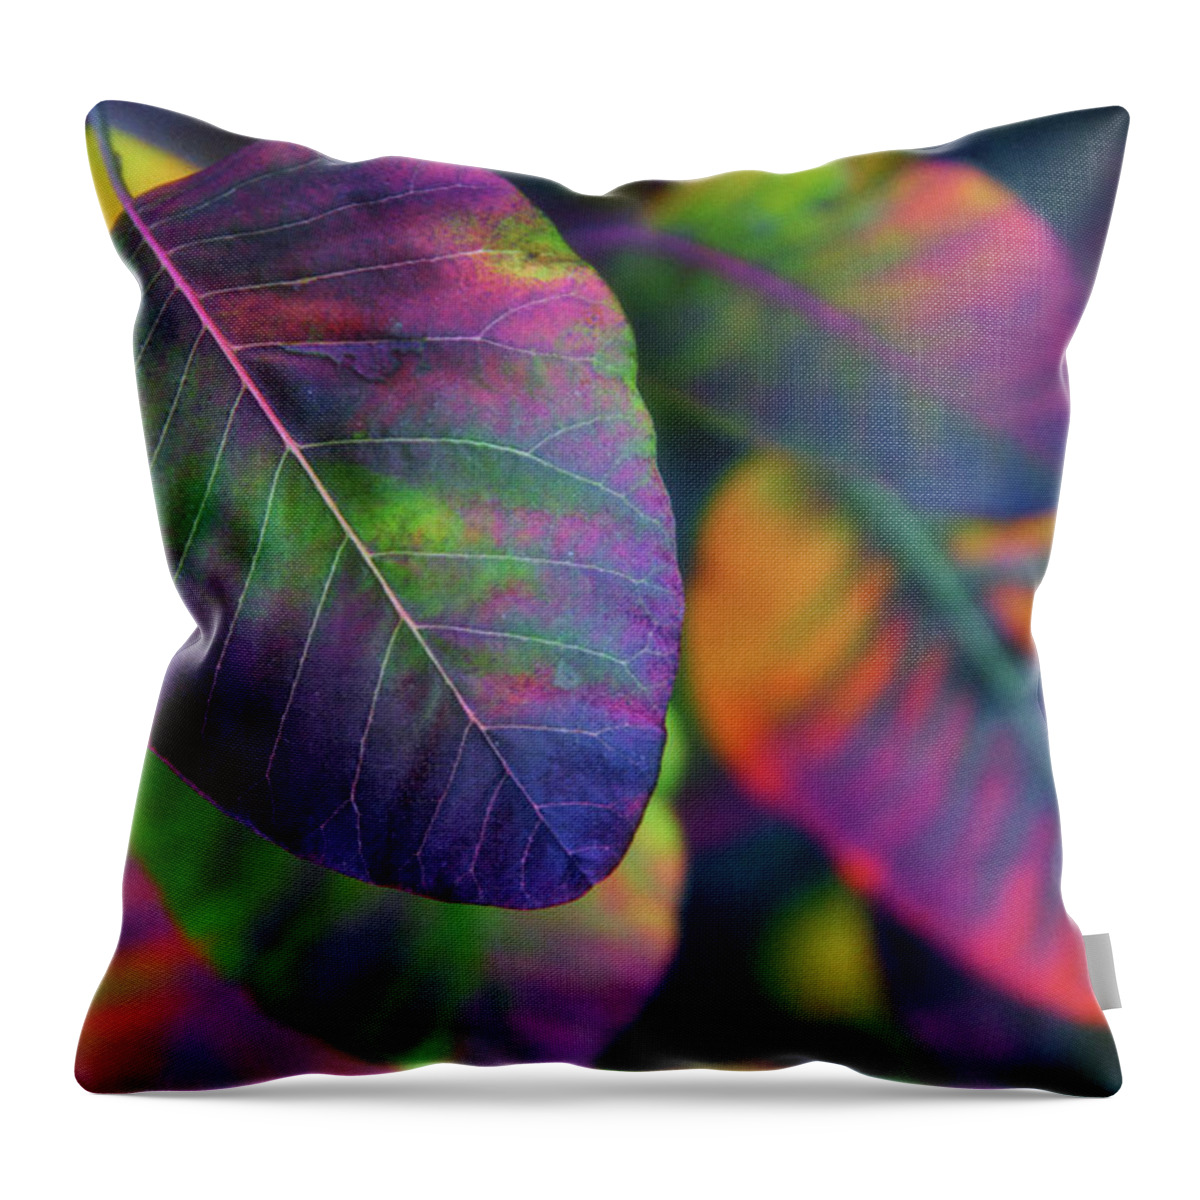 Leaves Throw Pillow featuring the photograph Peak Foliage by Jessica Jenney